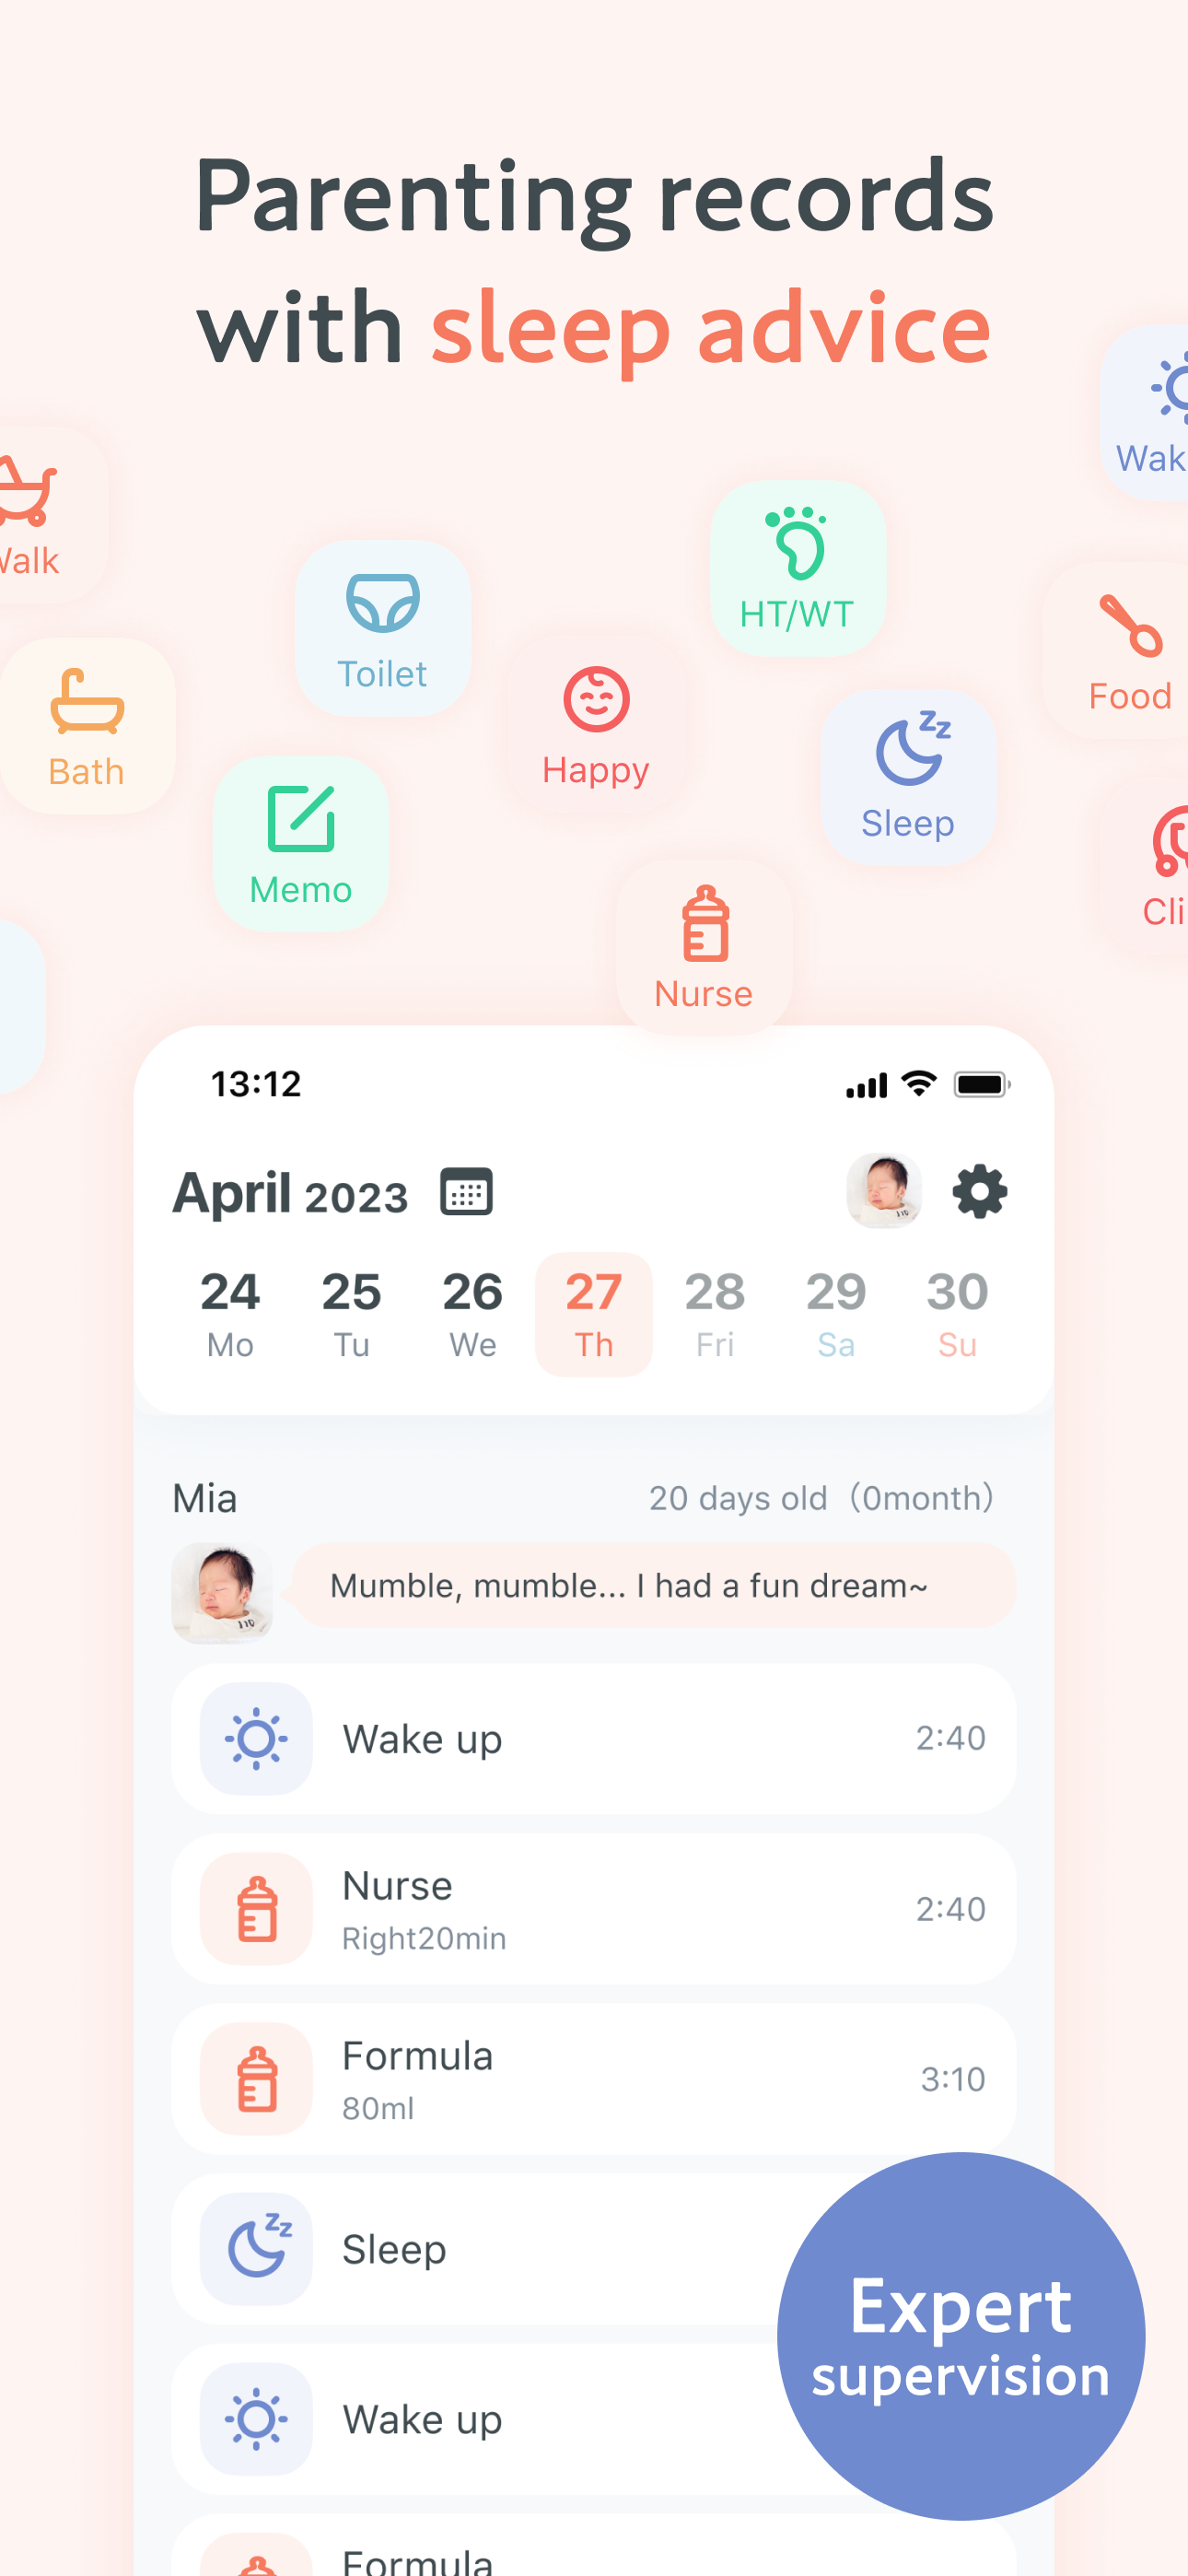 colone - Personal childcare AI assistant in your pocket.